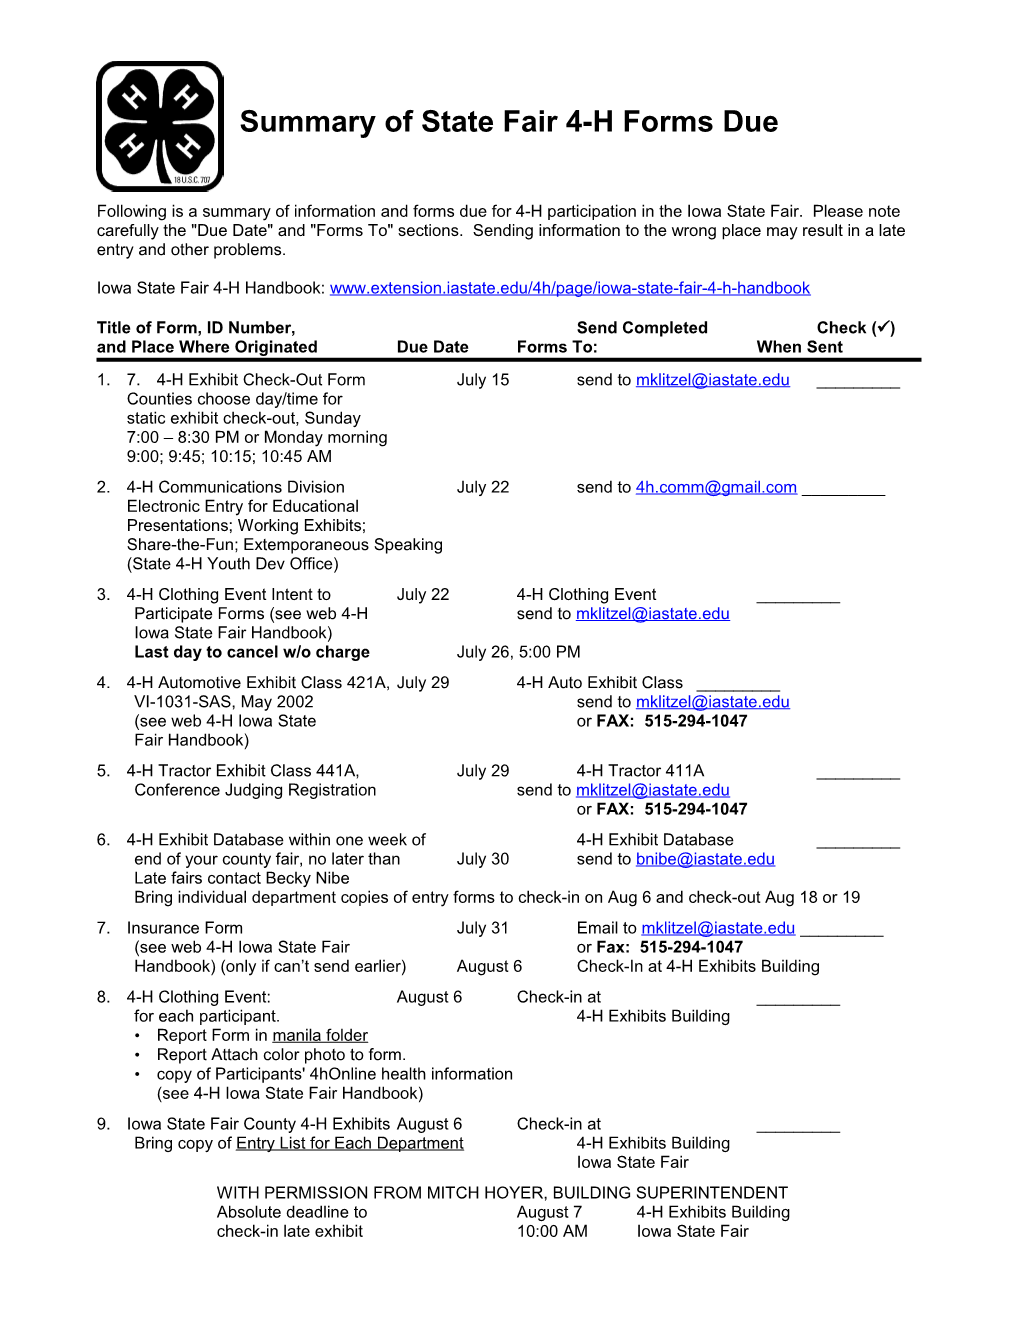 Summary of State Fair 4-H Forms Due